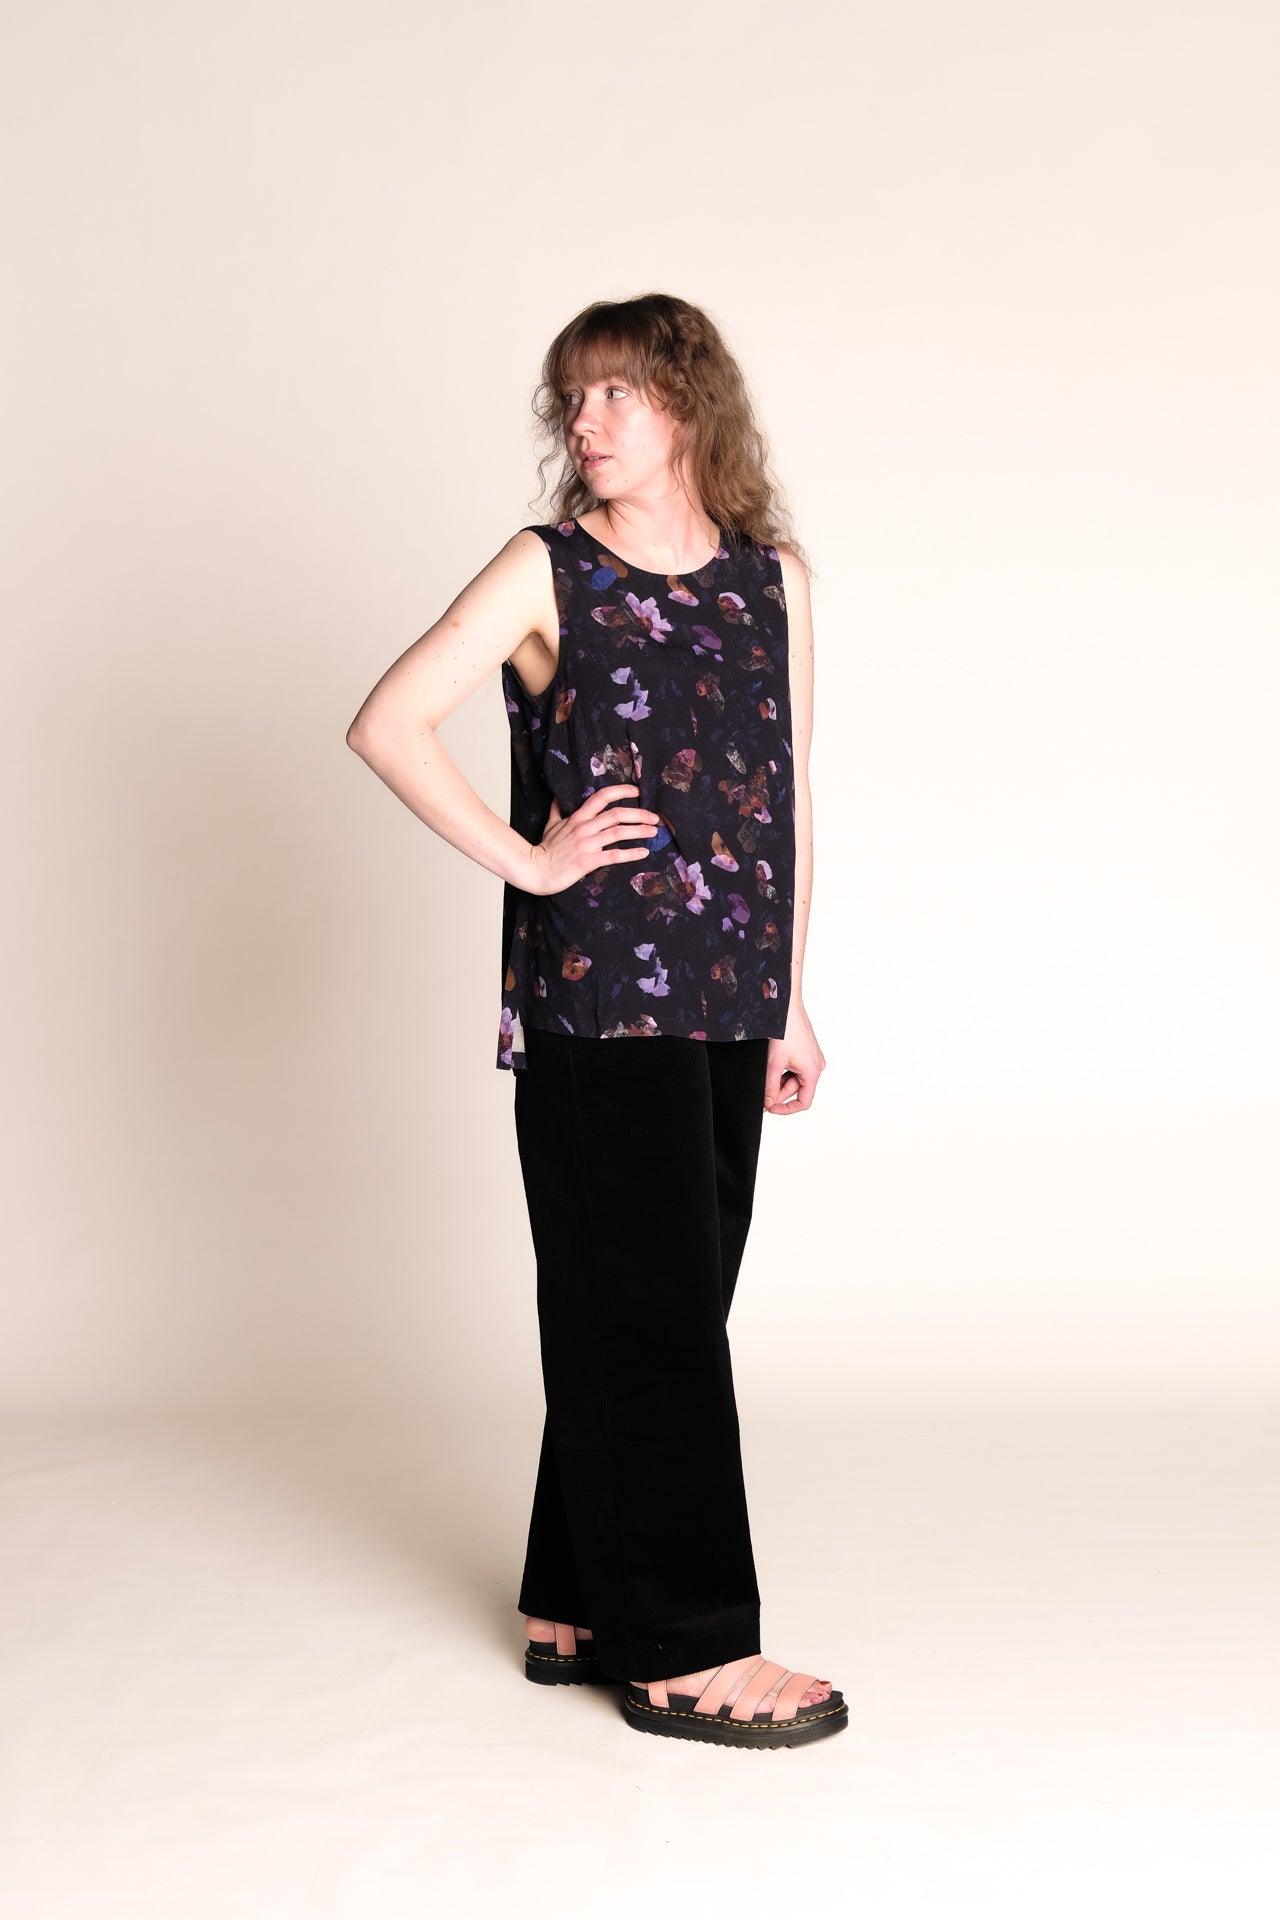 Buy online our sustainable clothing Top Luna Top - Dark Matter - MORICO